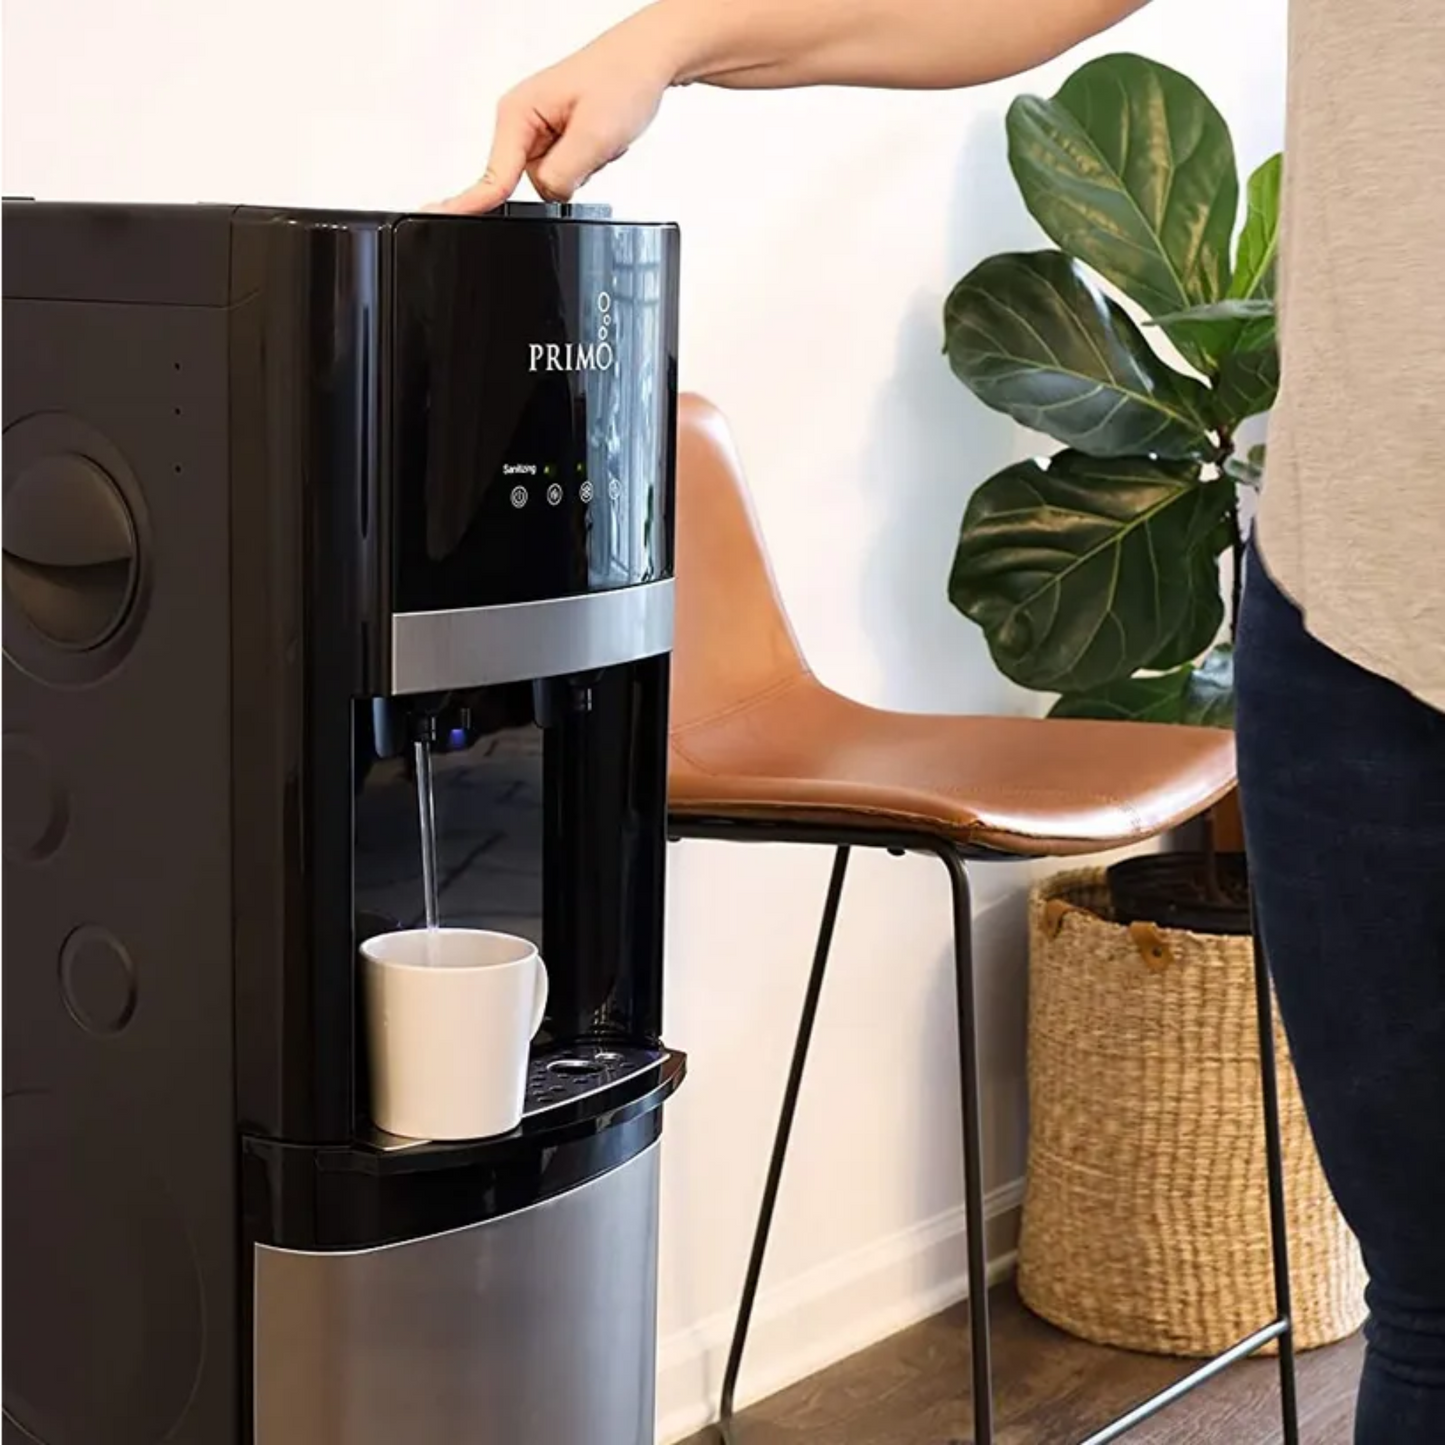 BPA-Free Certified Materials - Safe and Healthy Water Dispenser